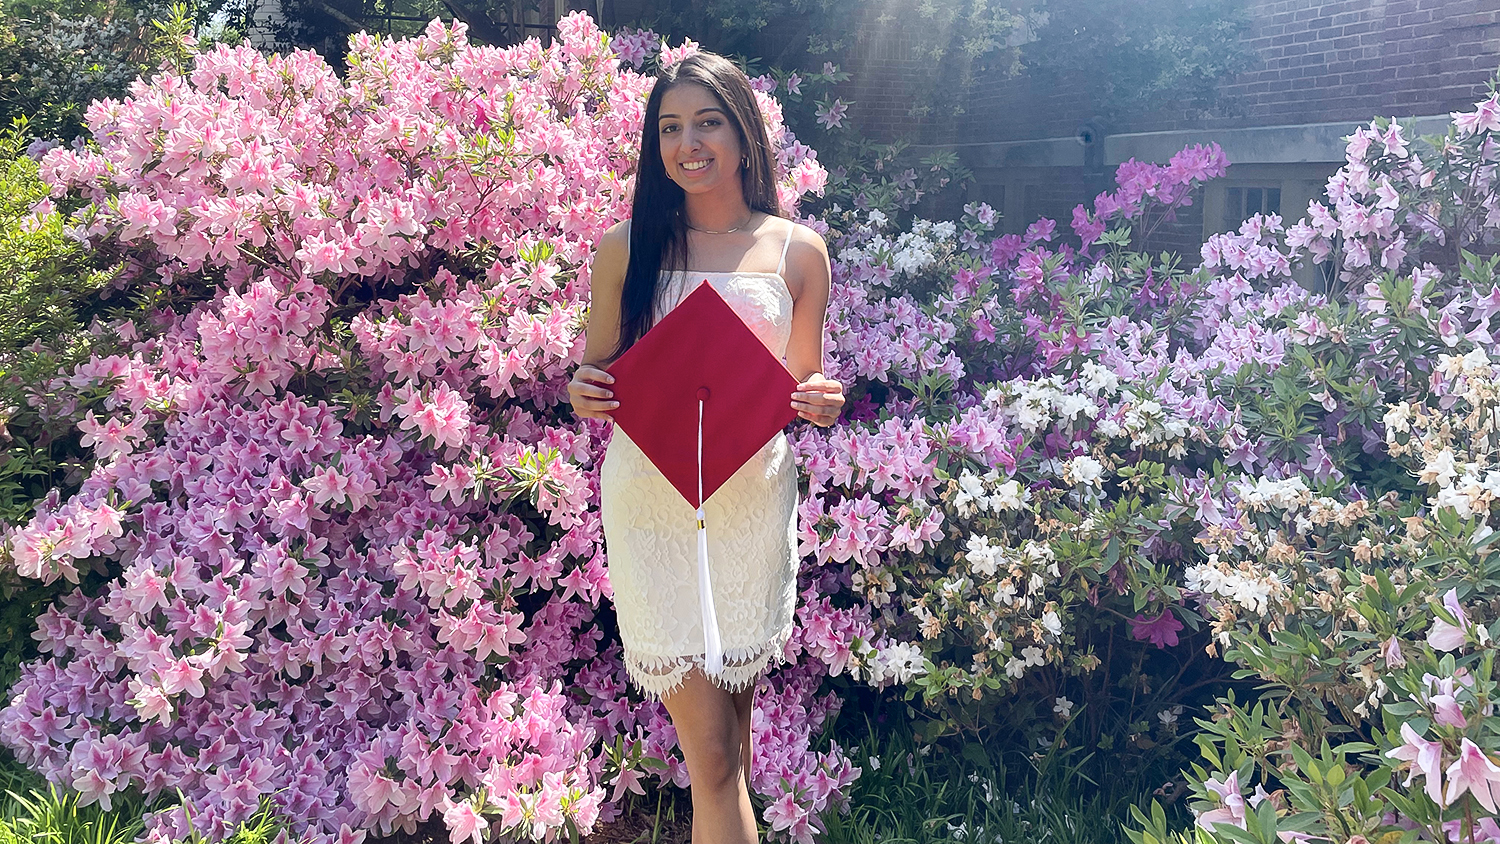 Manali Shirsekar, wearing a white dress while holding a red graduation cap, poses in front of pink azaleas.